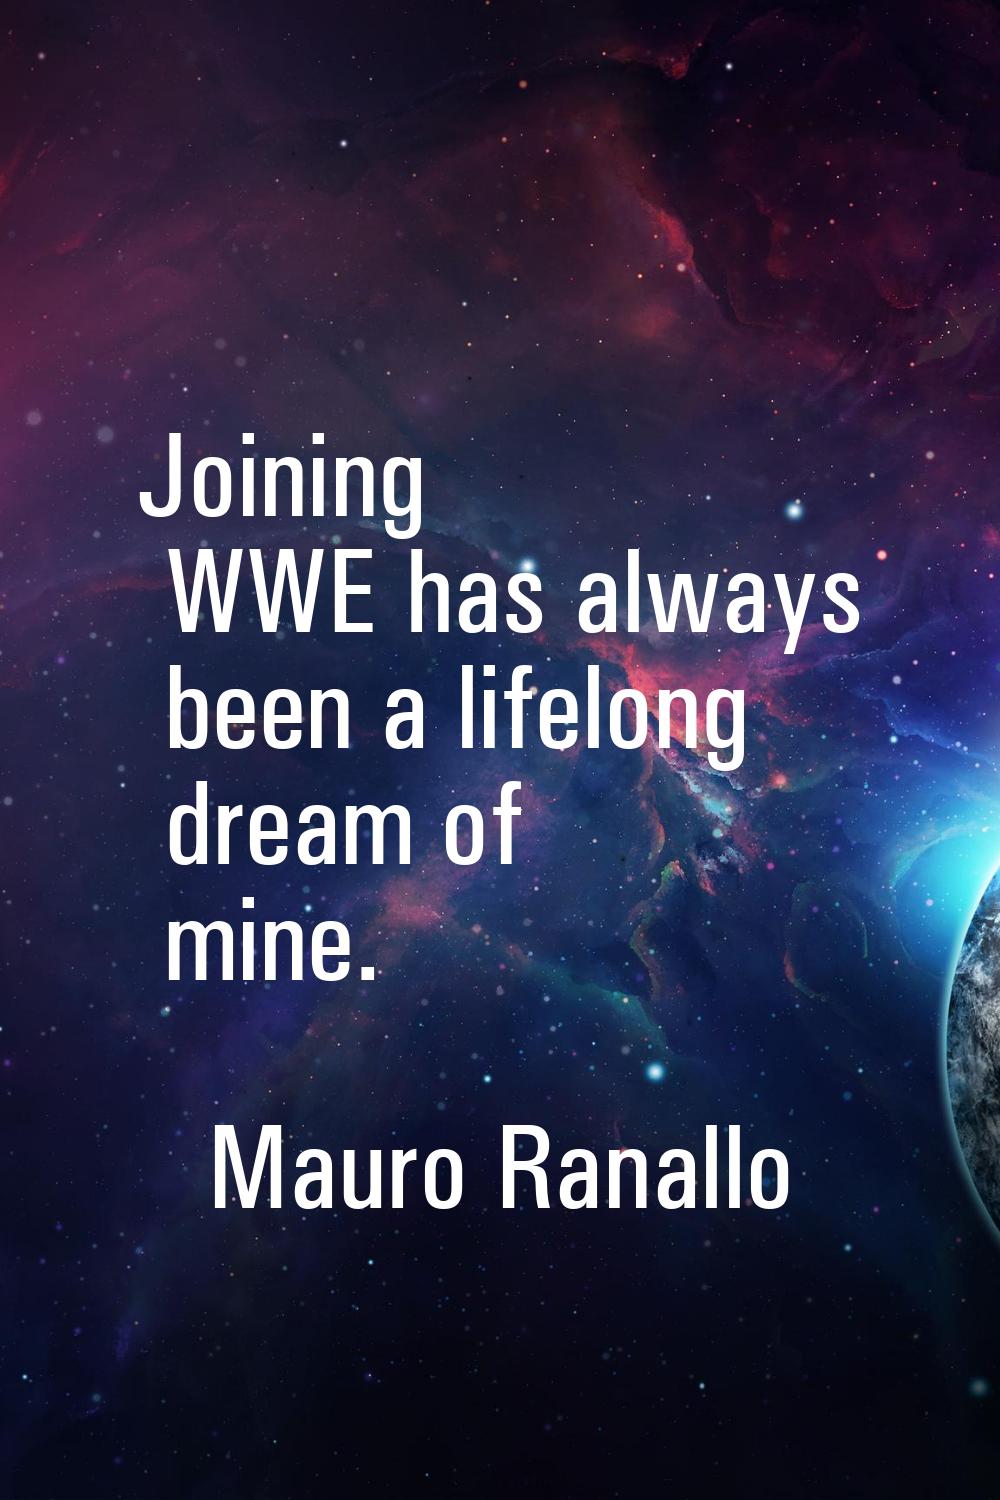 Joining WWE has always been a lifelong dream of mine.